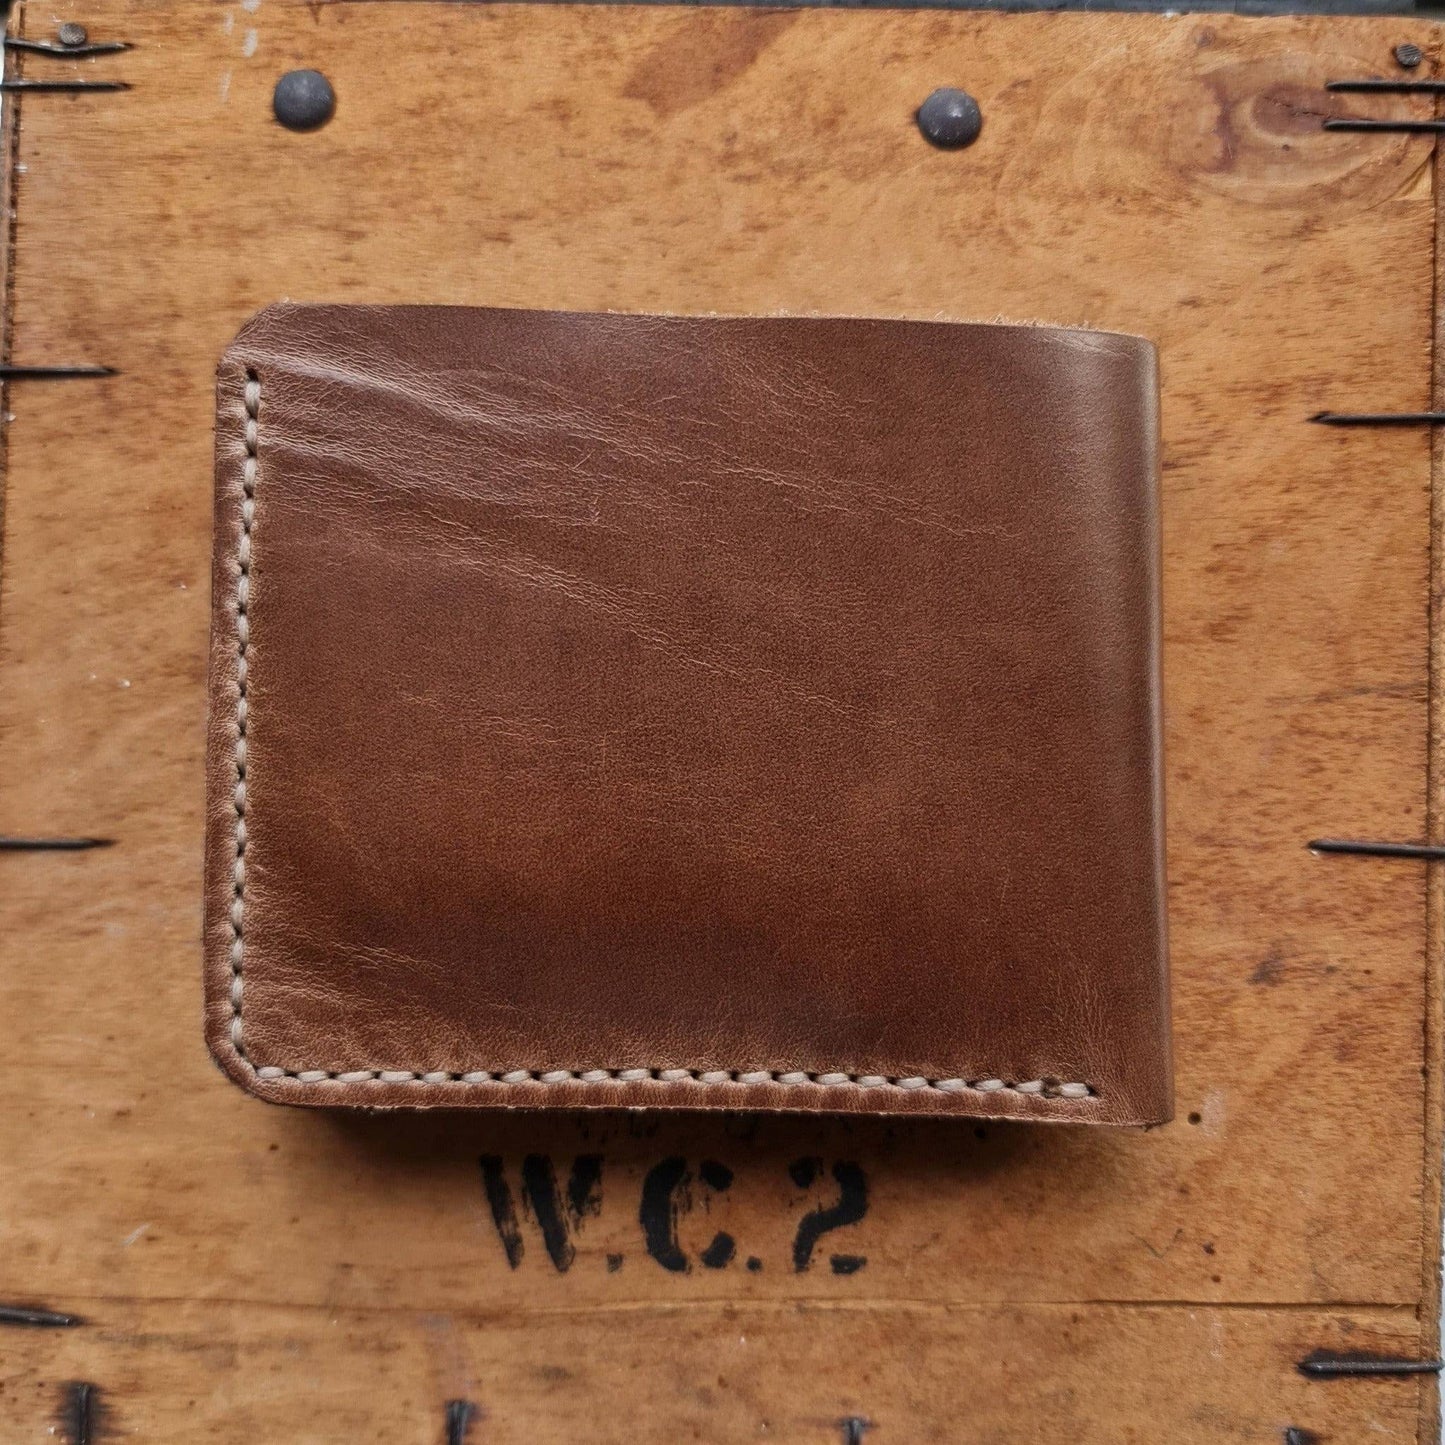 No. 2 Frontiersman Custom Leather Wallets, Horween Natural Chromexcel Leather, Back